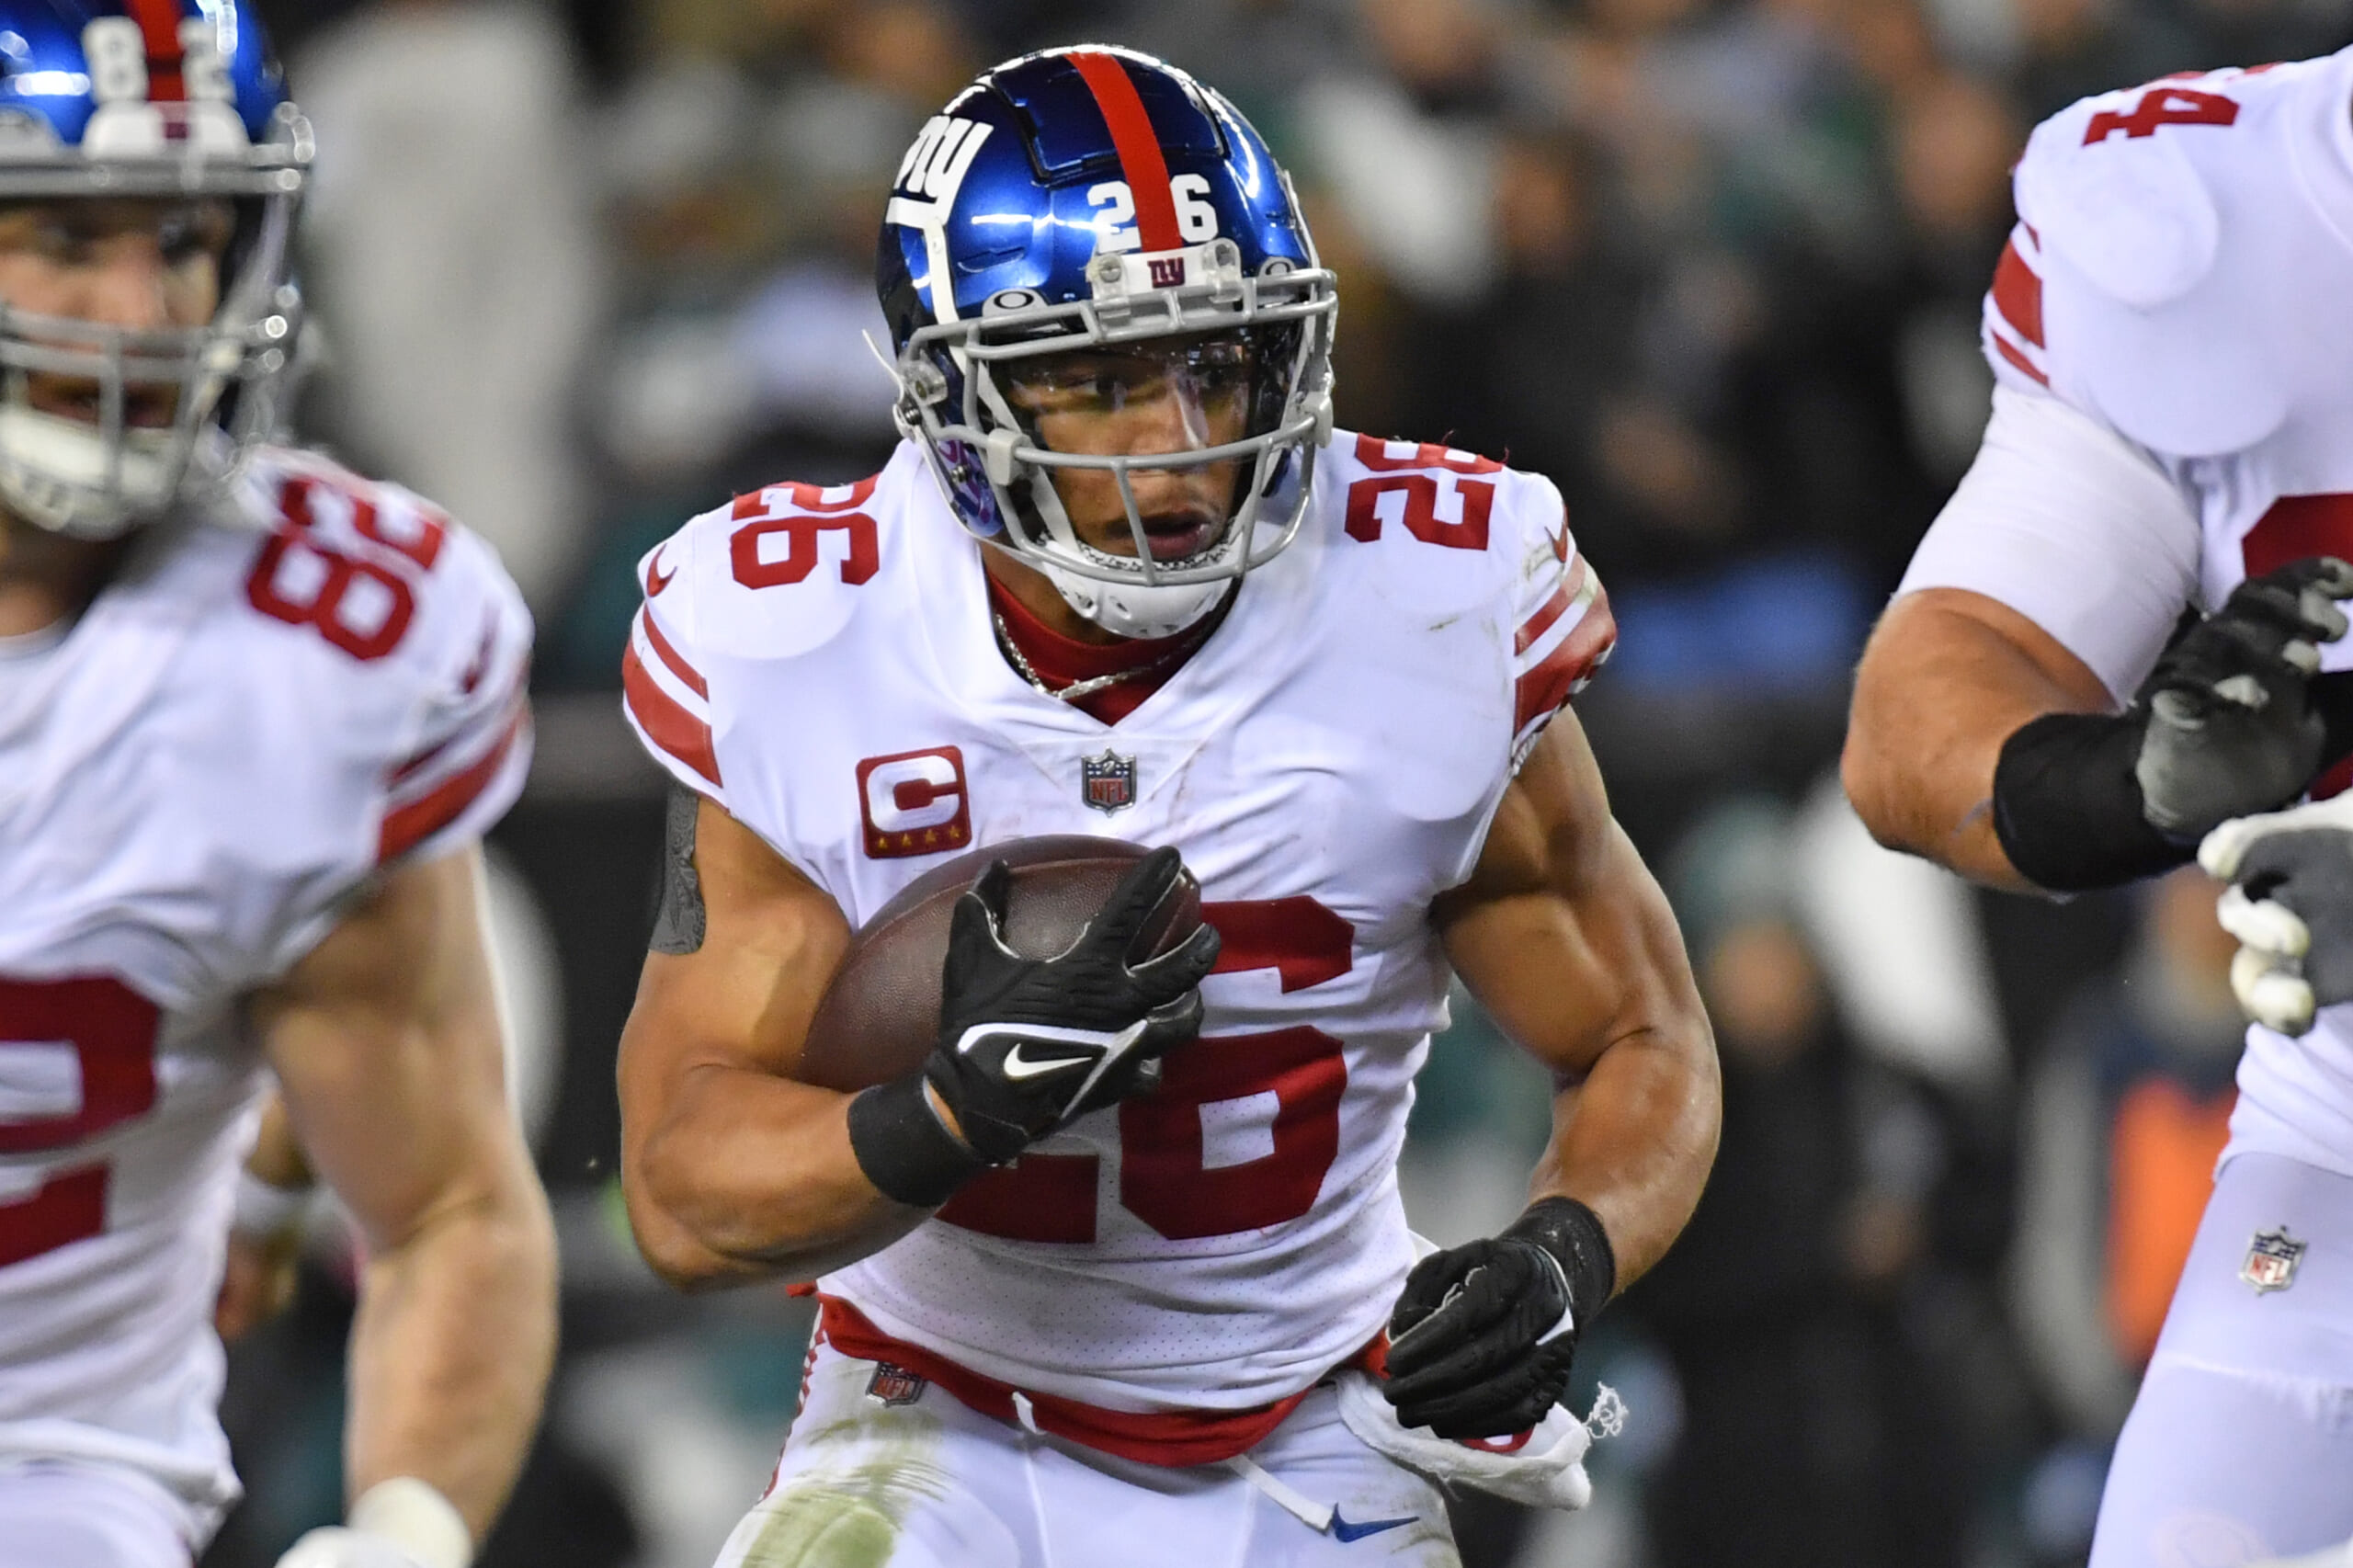 Giants Saquon Barkley Ready To Add Another Element To His Game